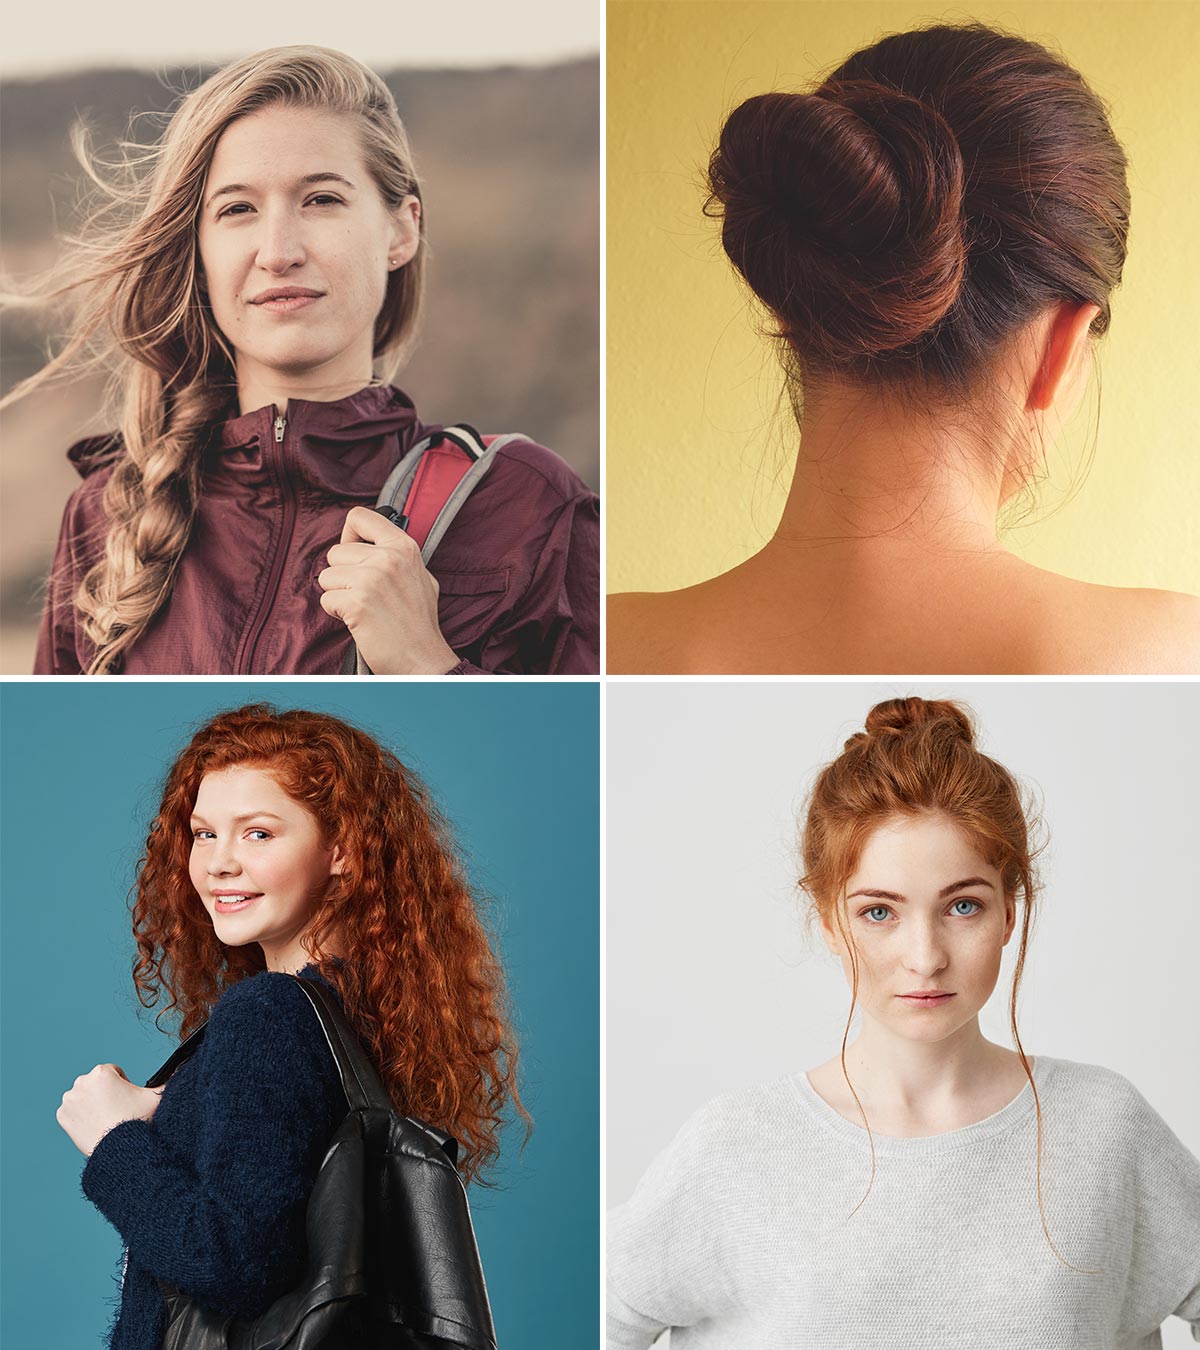 10 Jaw Dropping Types Of Updo Hairstyles Women Should Know About